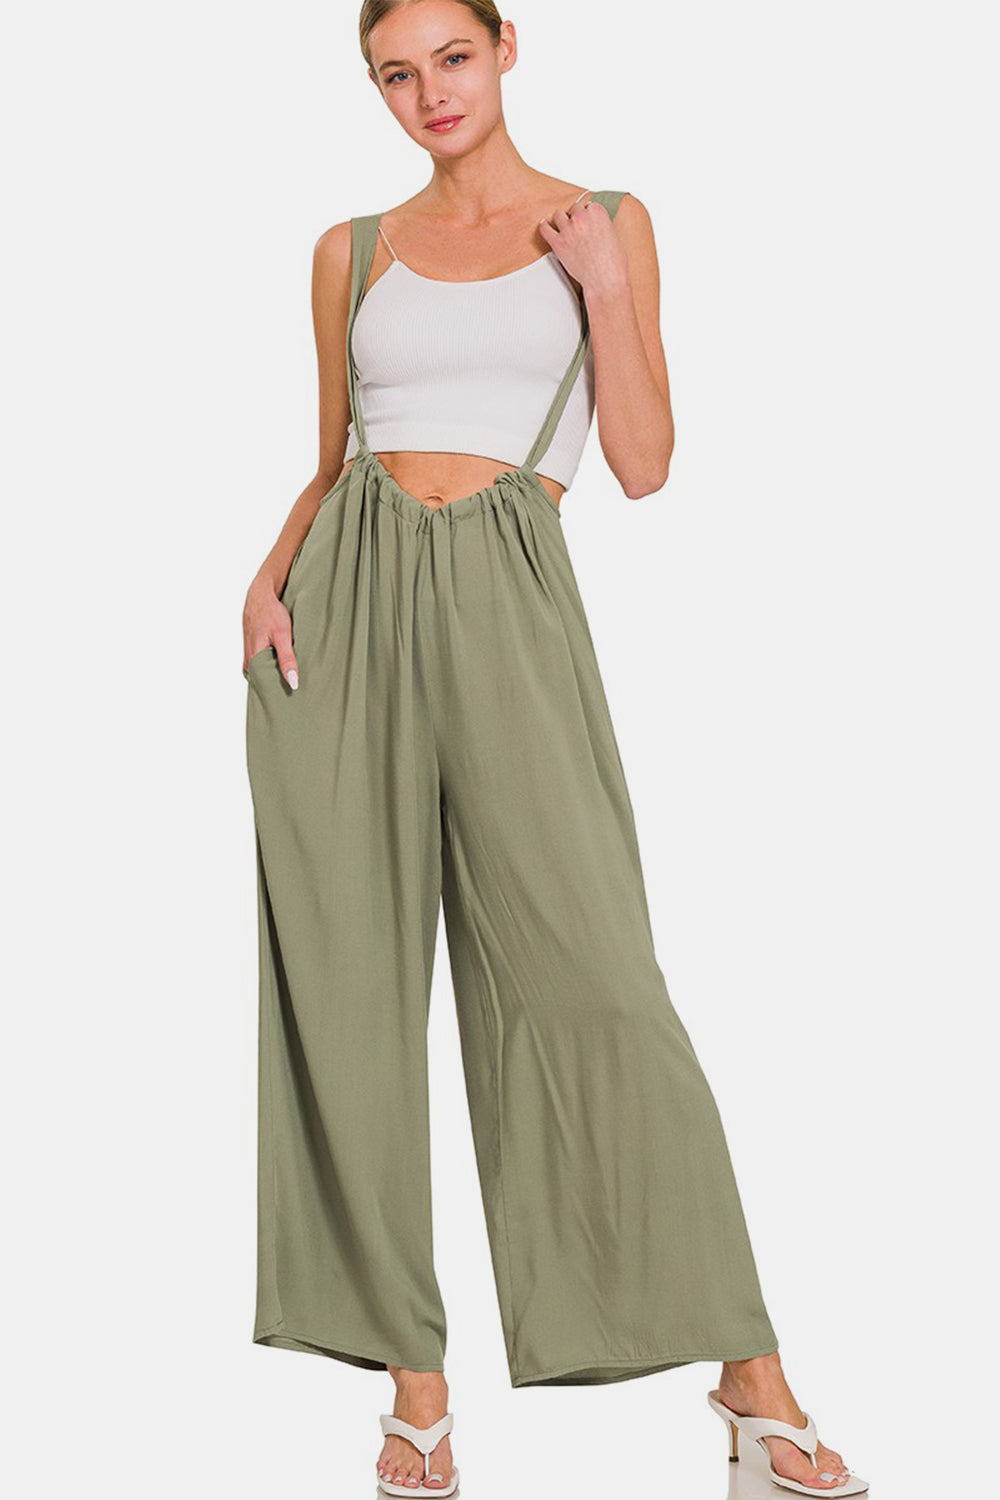 Zenana Pocketed Wide Strap Wide Leg Overalls Sunset and Swim Lt Olive S 